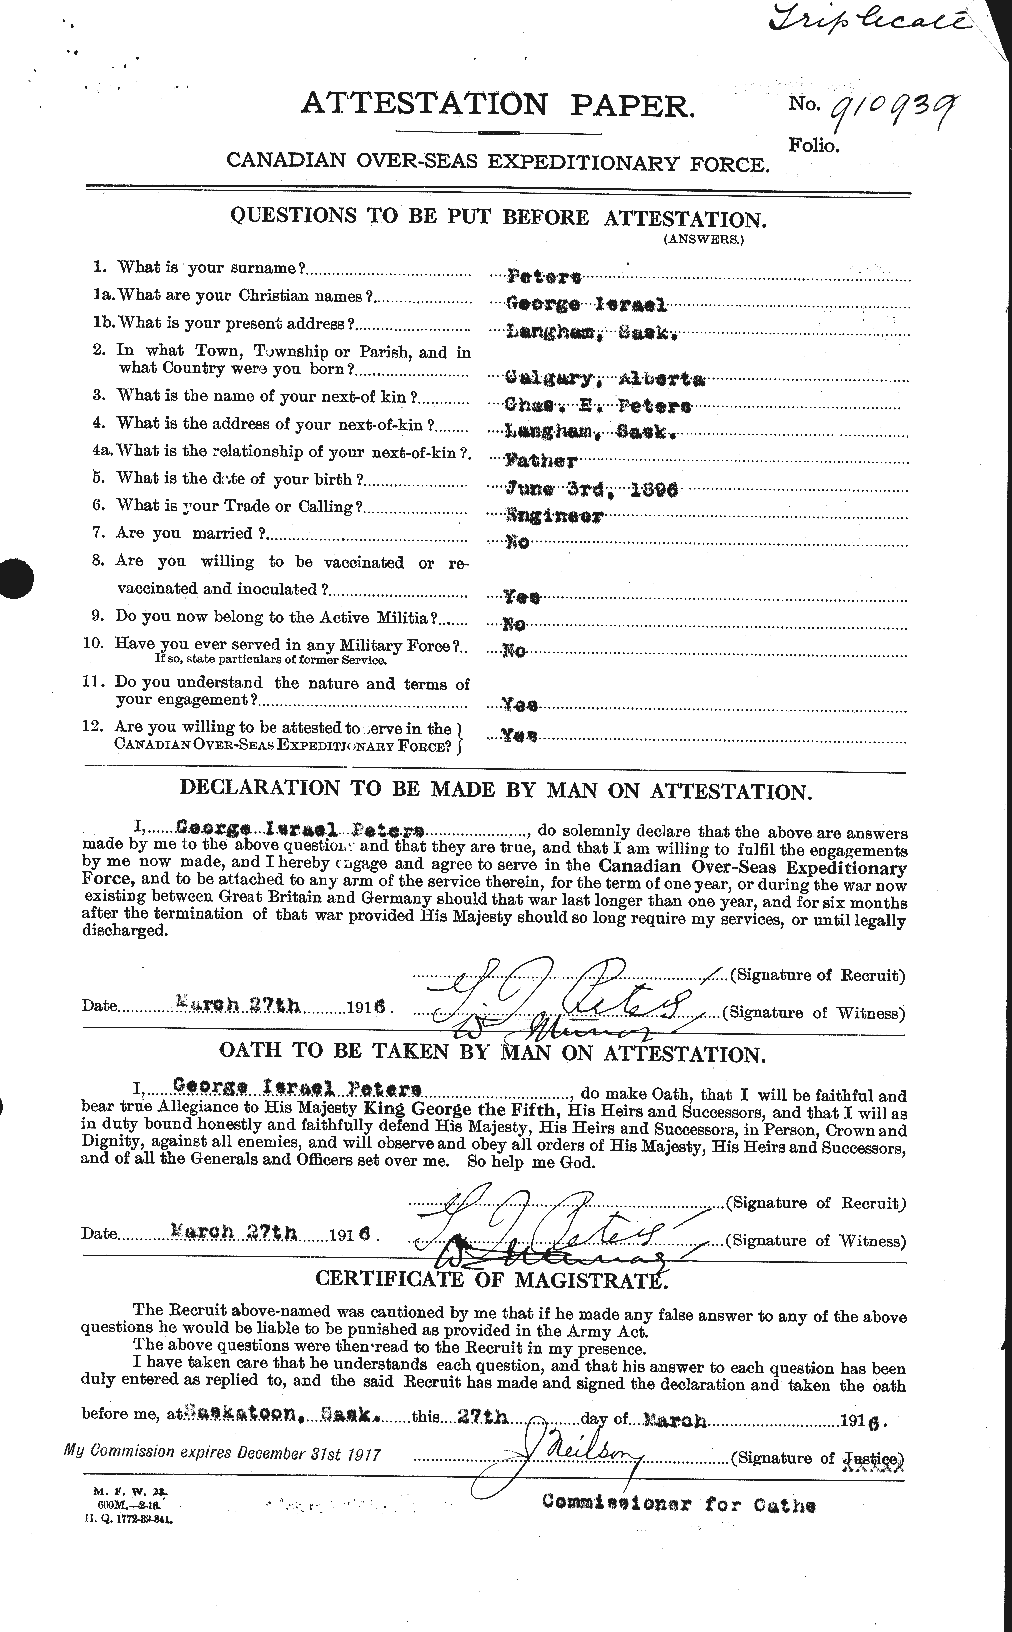 Personnel Records of the First World War - CEF 575460a